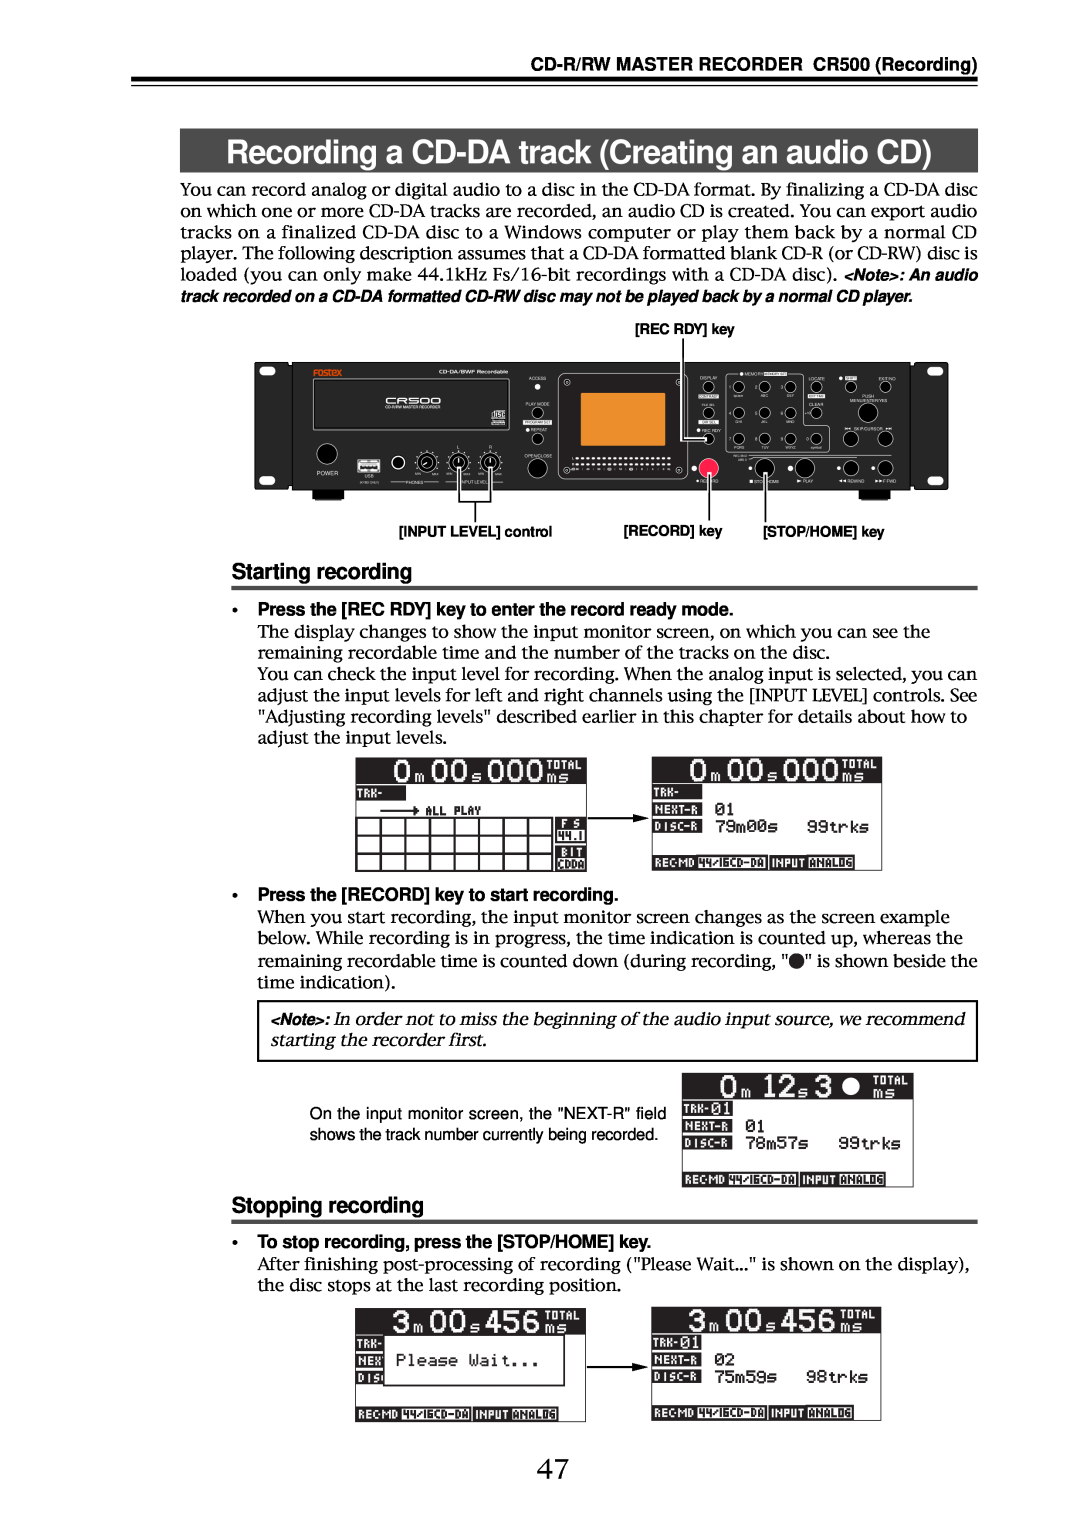 Fostex CR500 owner manual Recording a CD-DAtrack Creating an audio CD, Starting recording, Stopping recording 